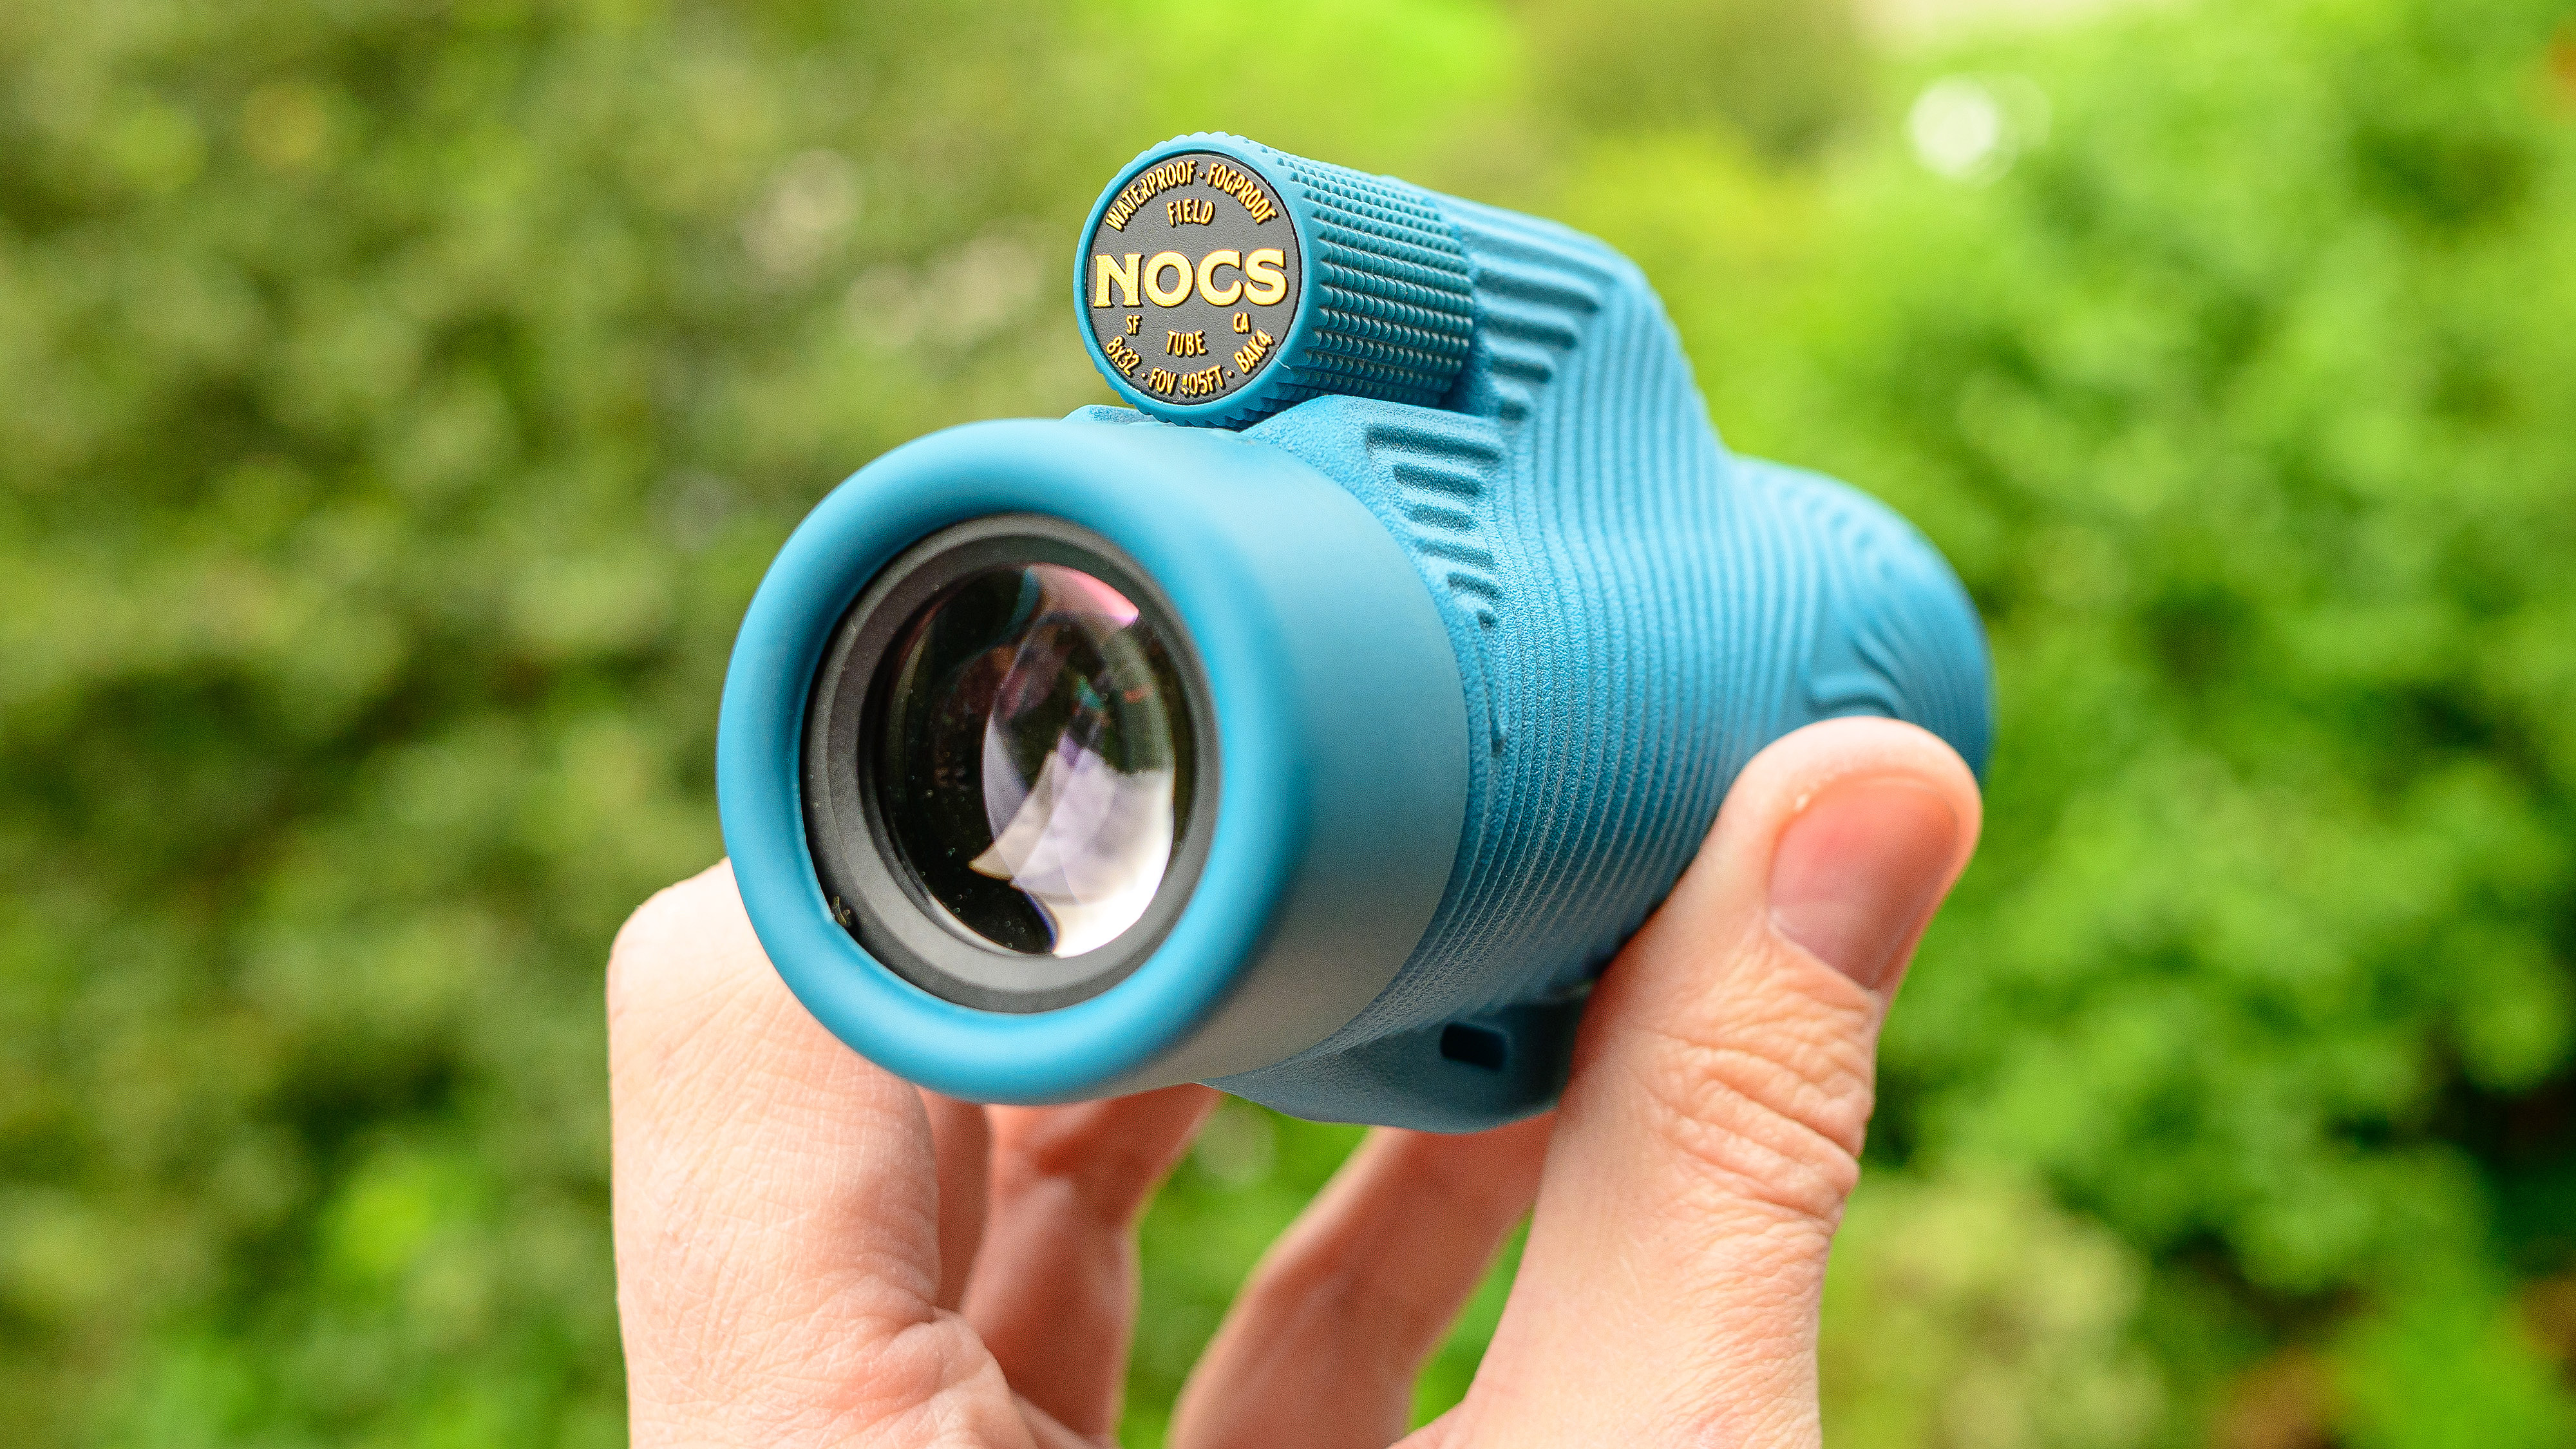 Nocs Field Tube Monocular in baby blue. Shown in a user's hand against a green background.